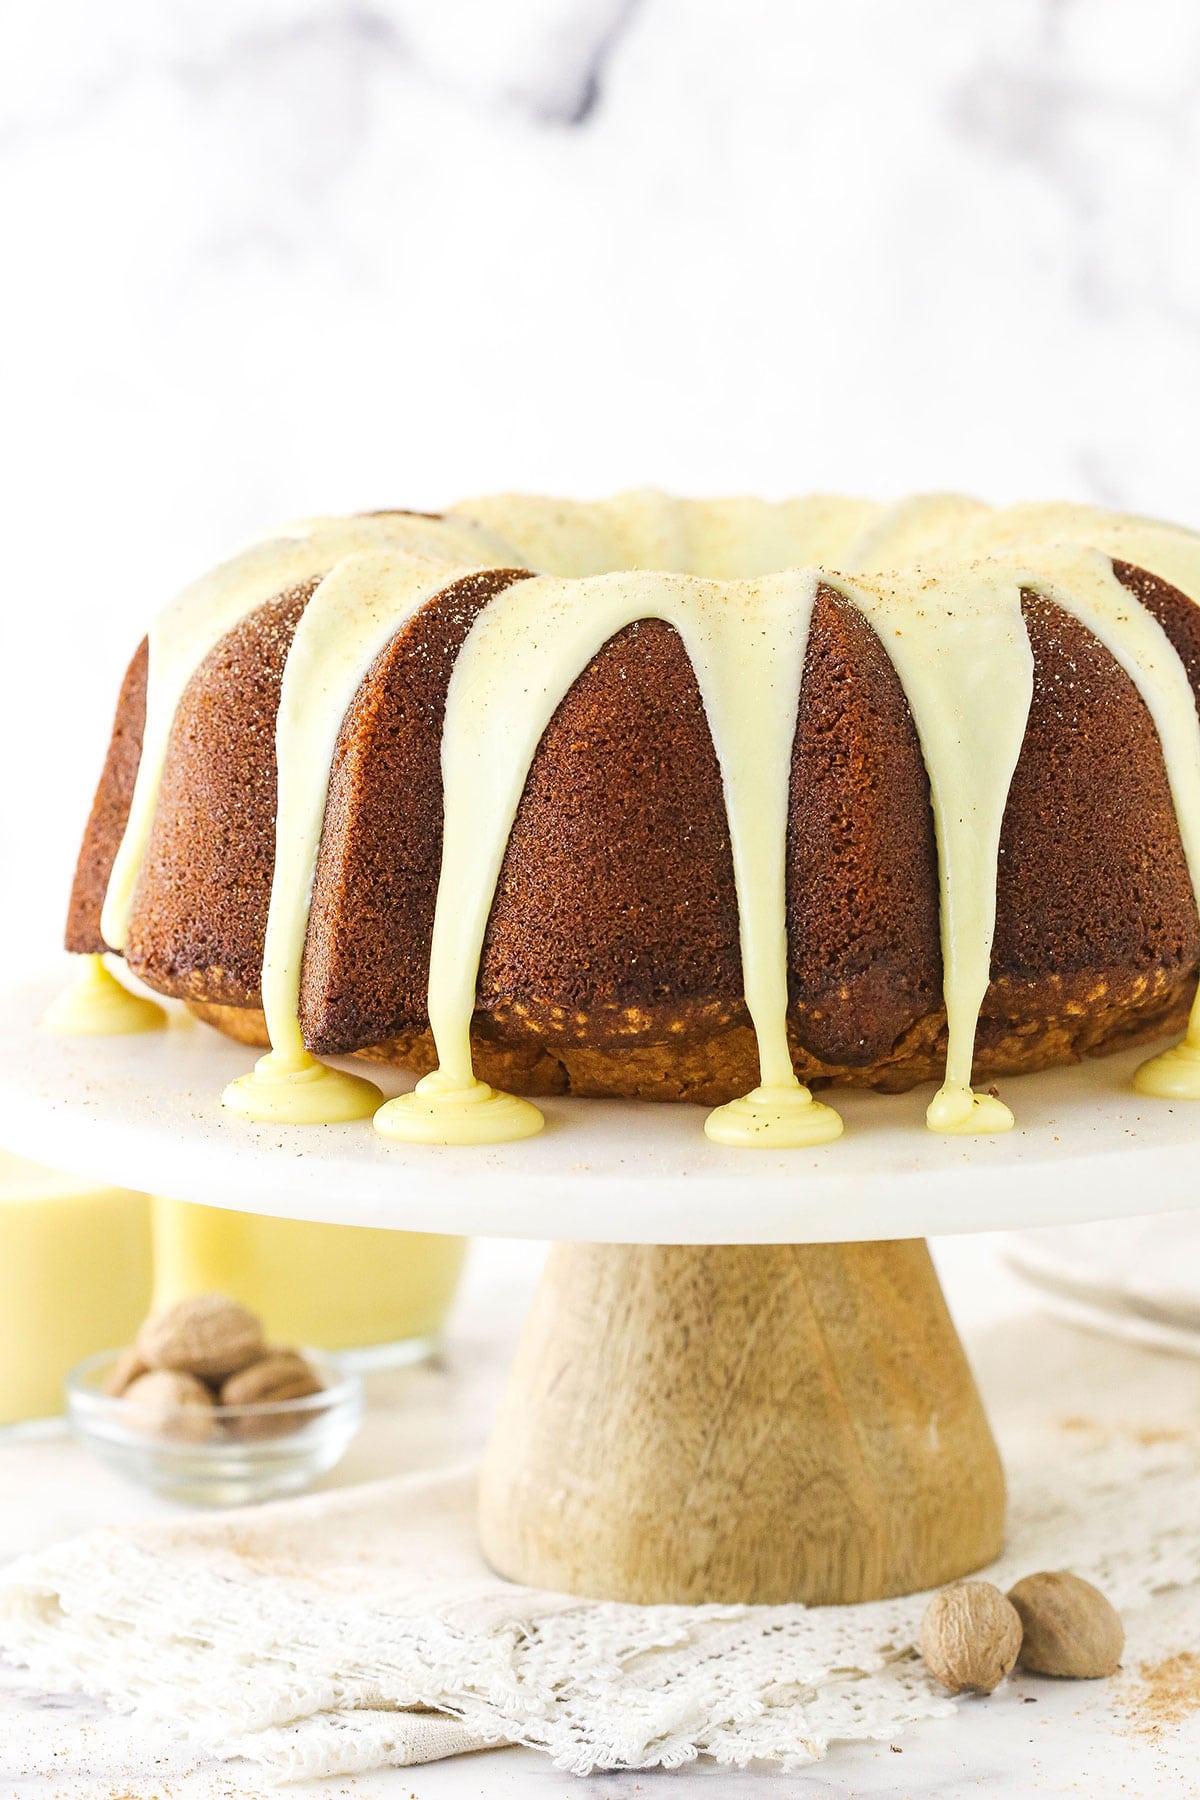 A bundt cake that has just been topped with glaze on a cake stand over a granite countertop